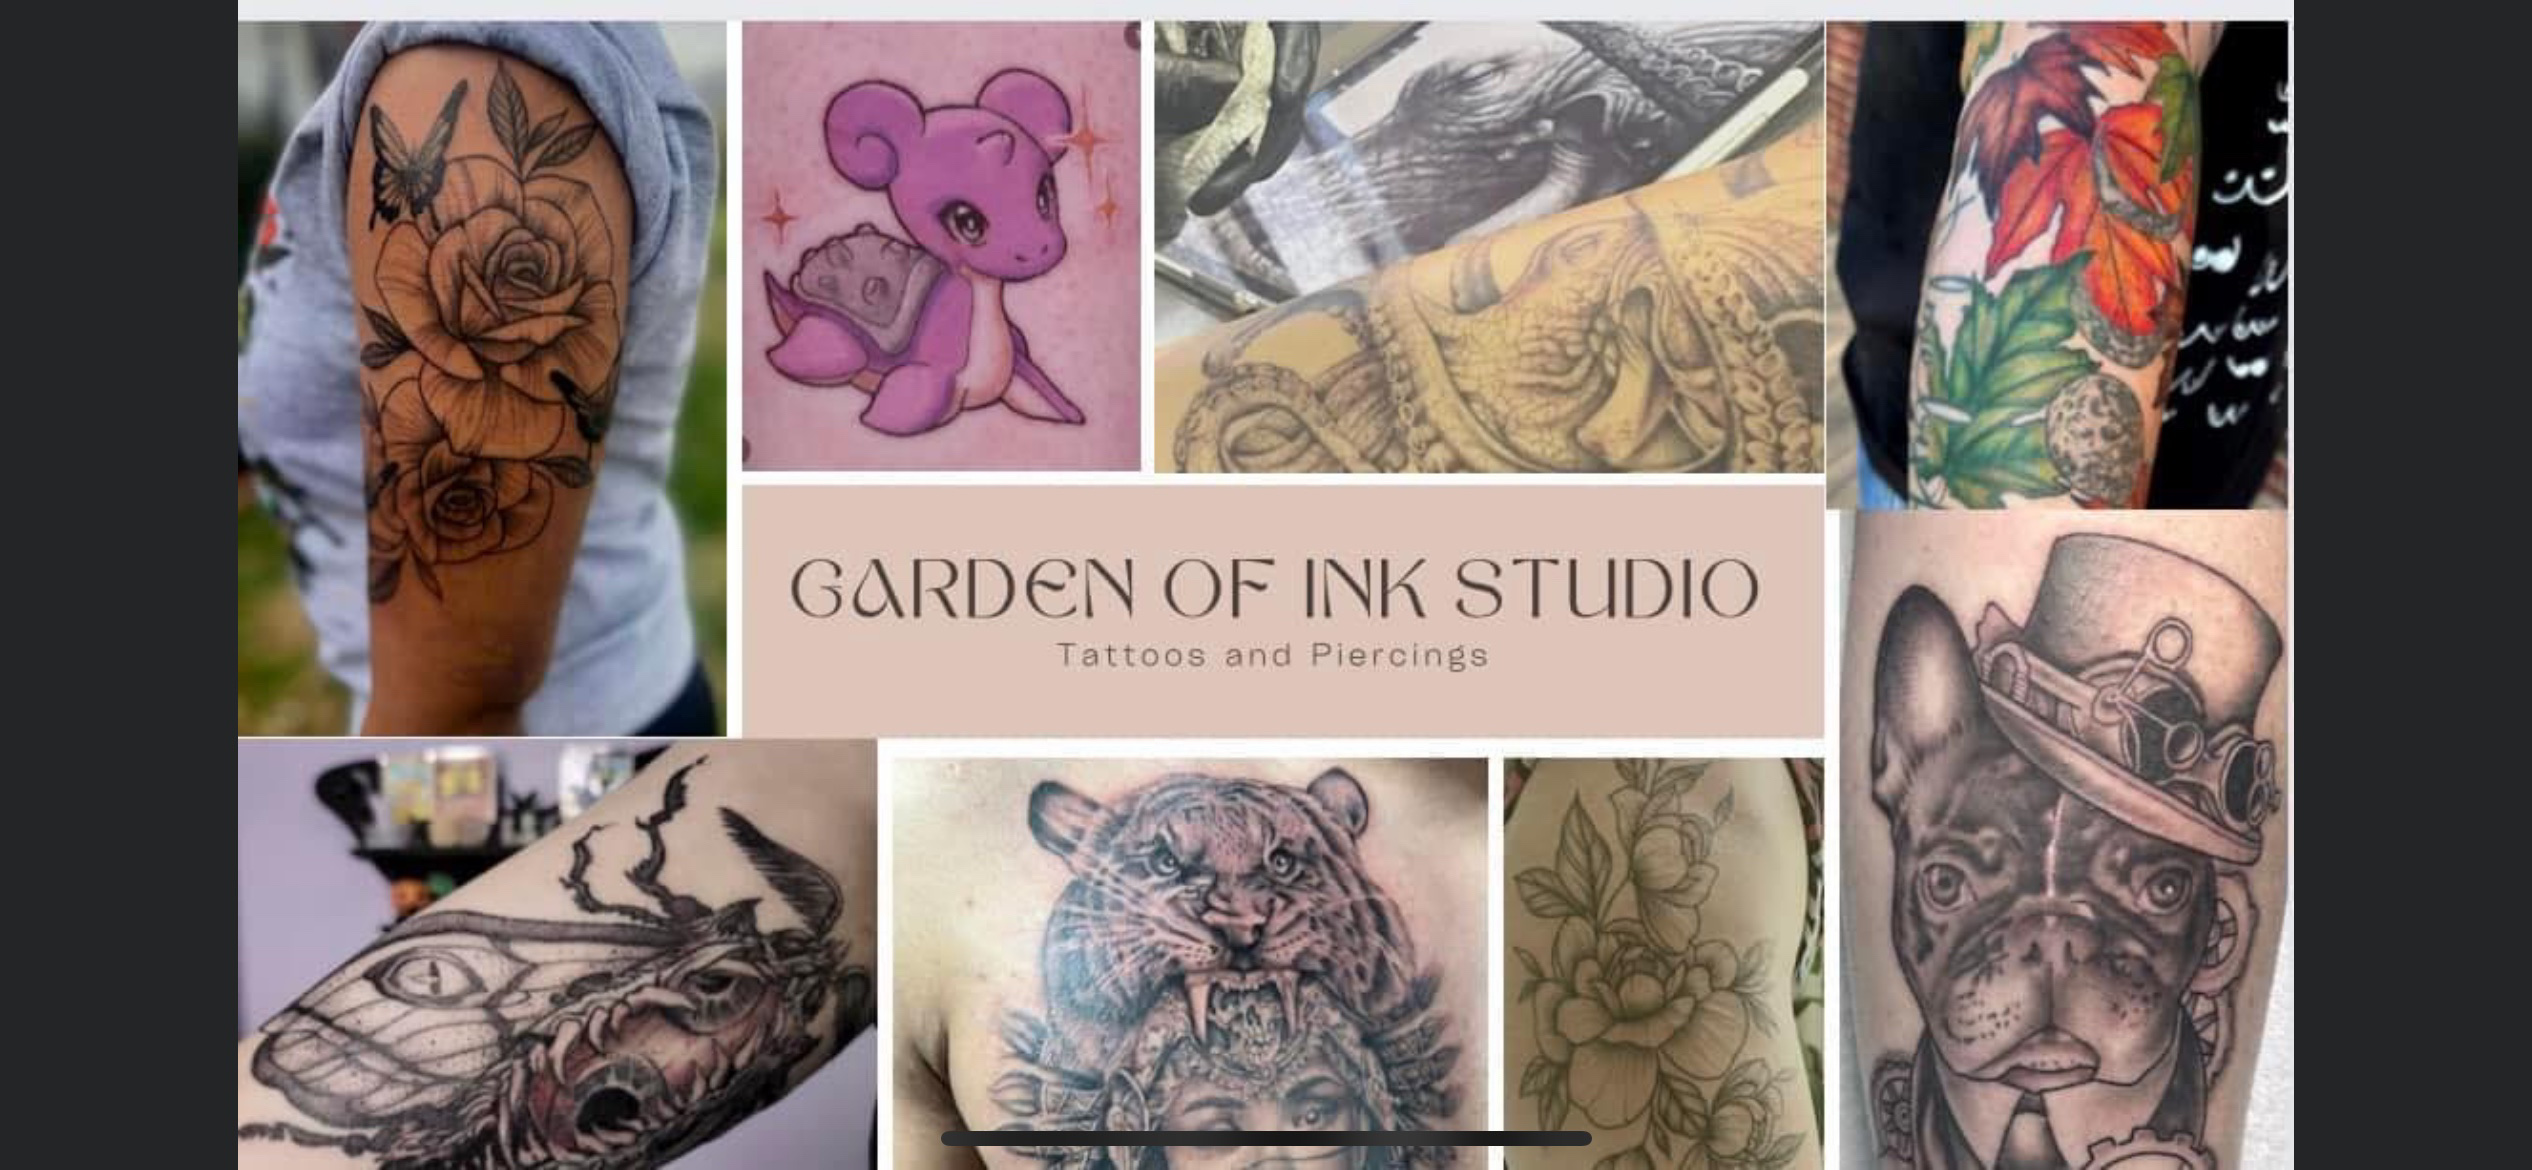 We are a professional tattoo and body piercing studio located in Greensboro  North Carolina We offer tattoos from award winning artists in a clean and  sterile environment Our artists all have their areas of specialty but are  all well rounded in several styles 